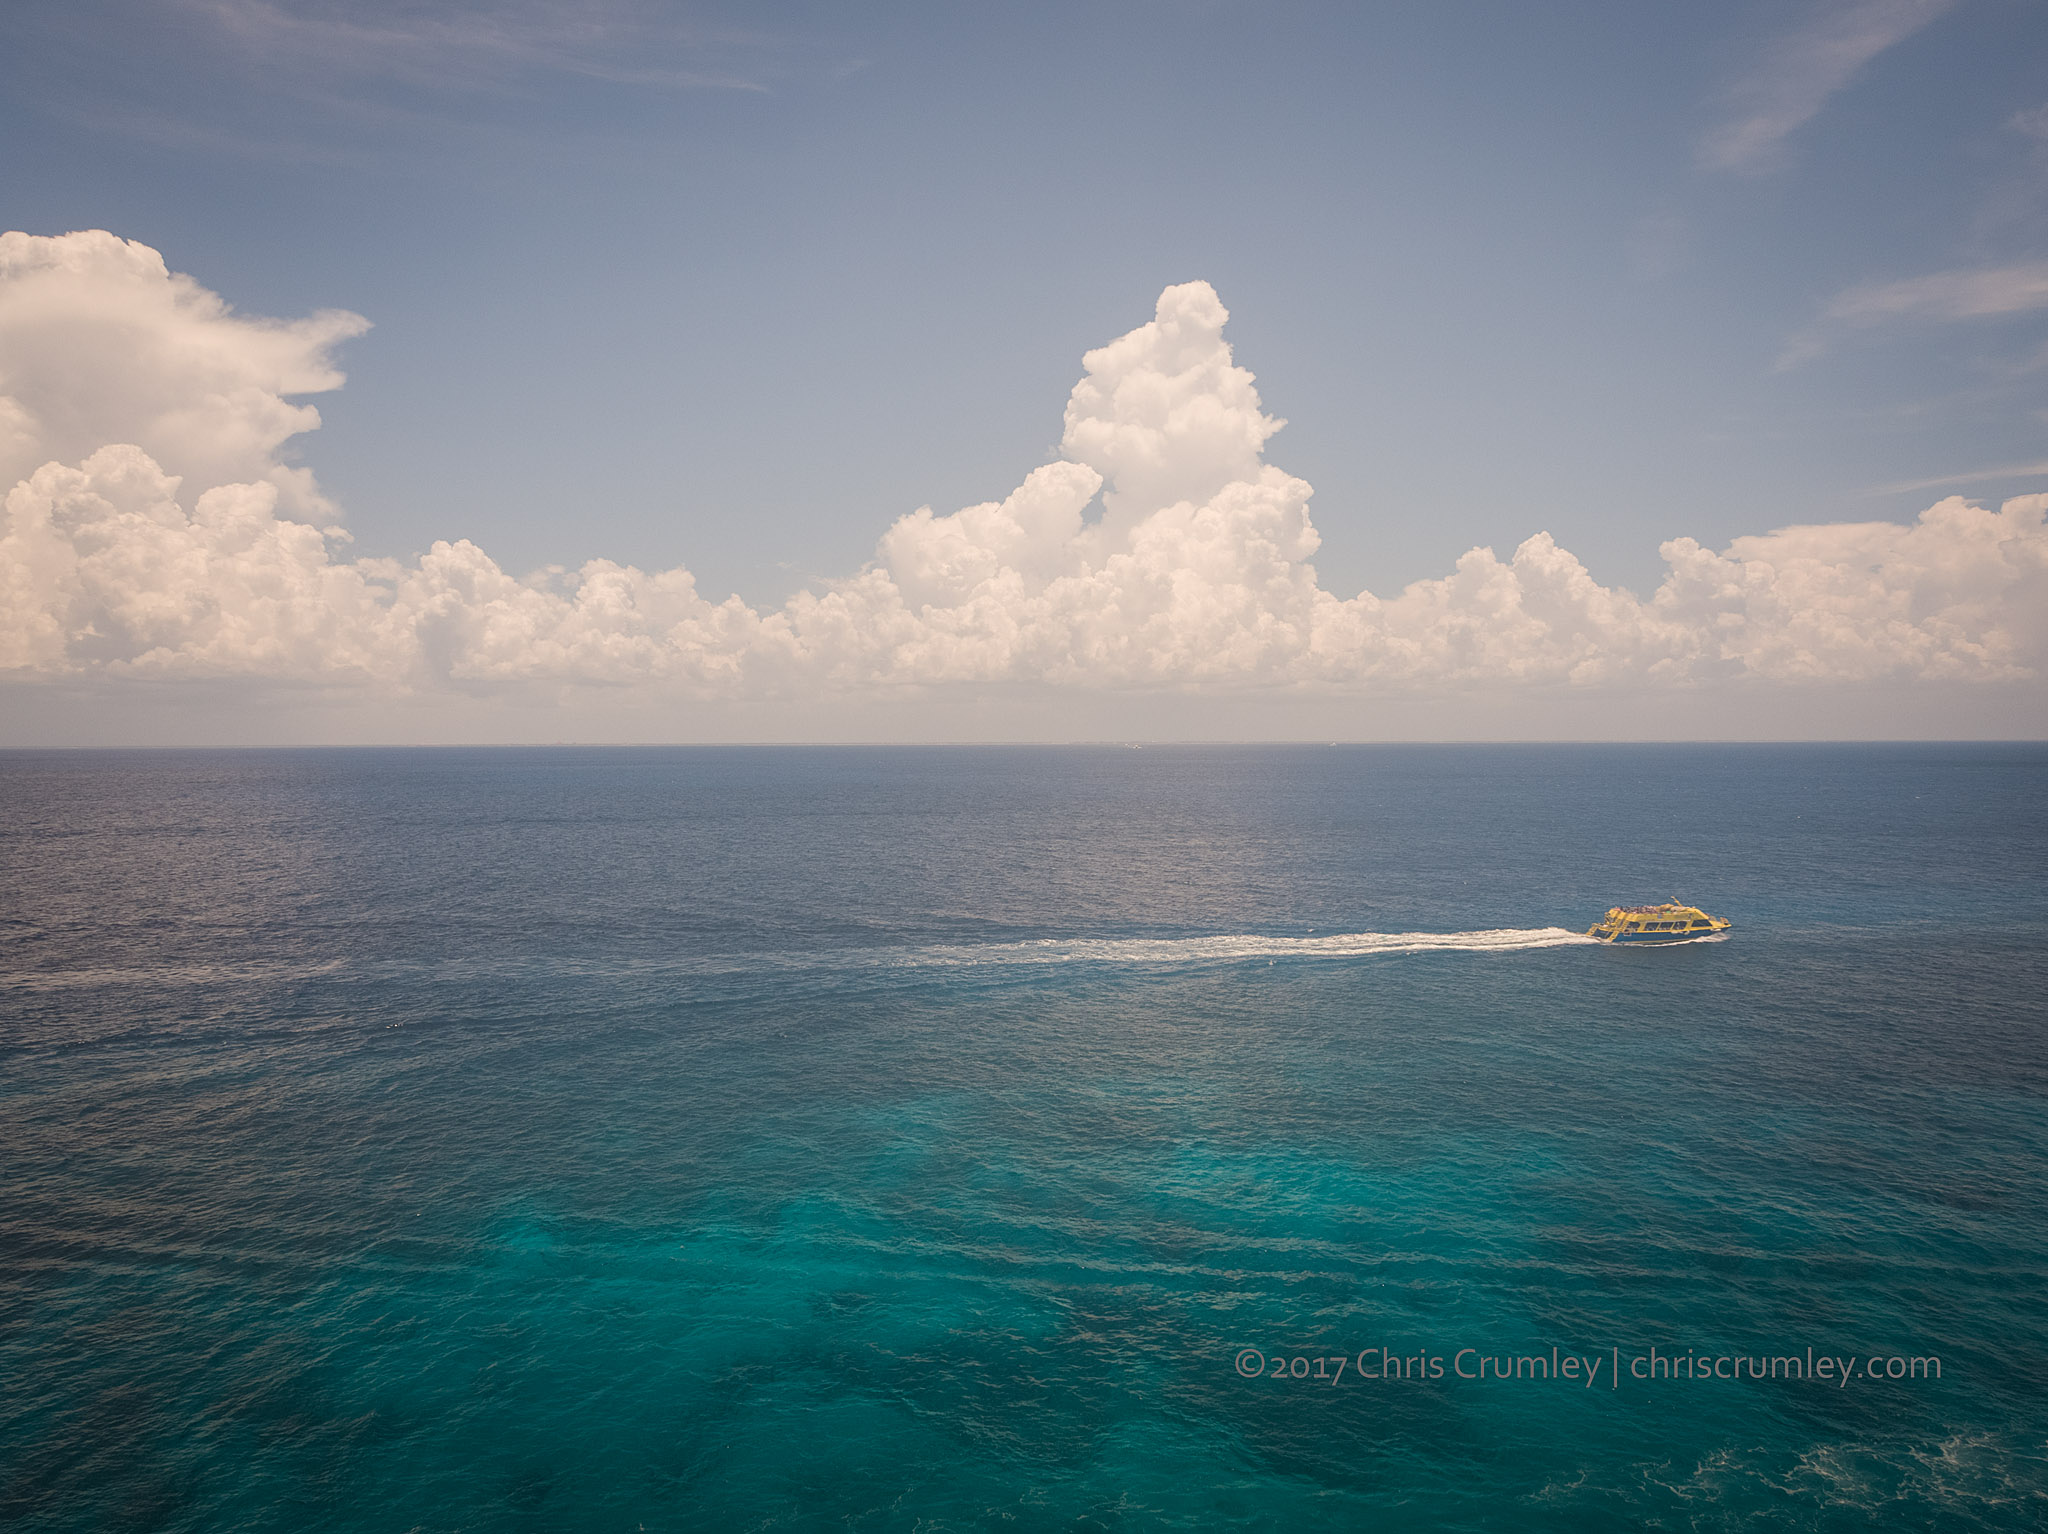 A Ferry in Cozumel, Mexico